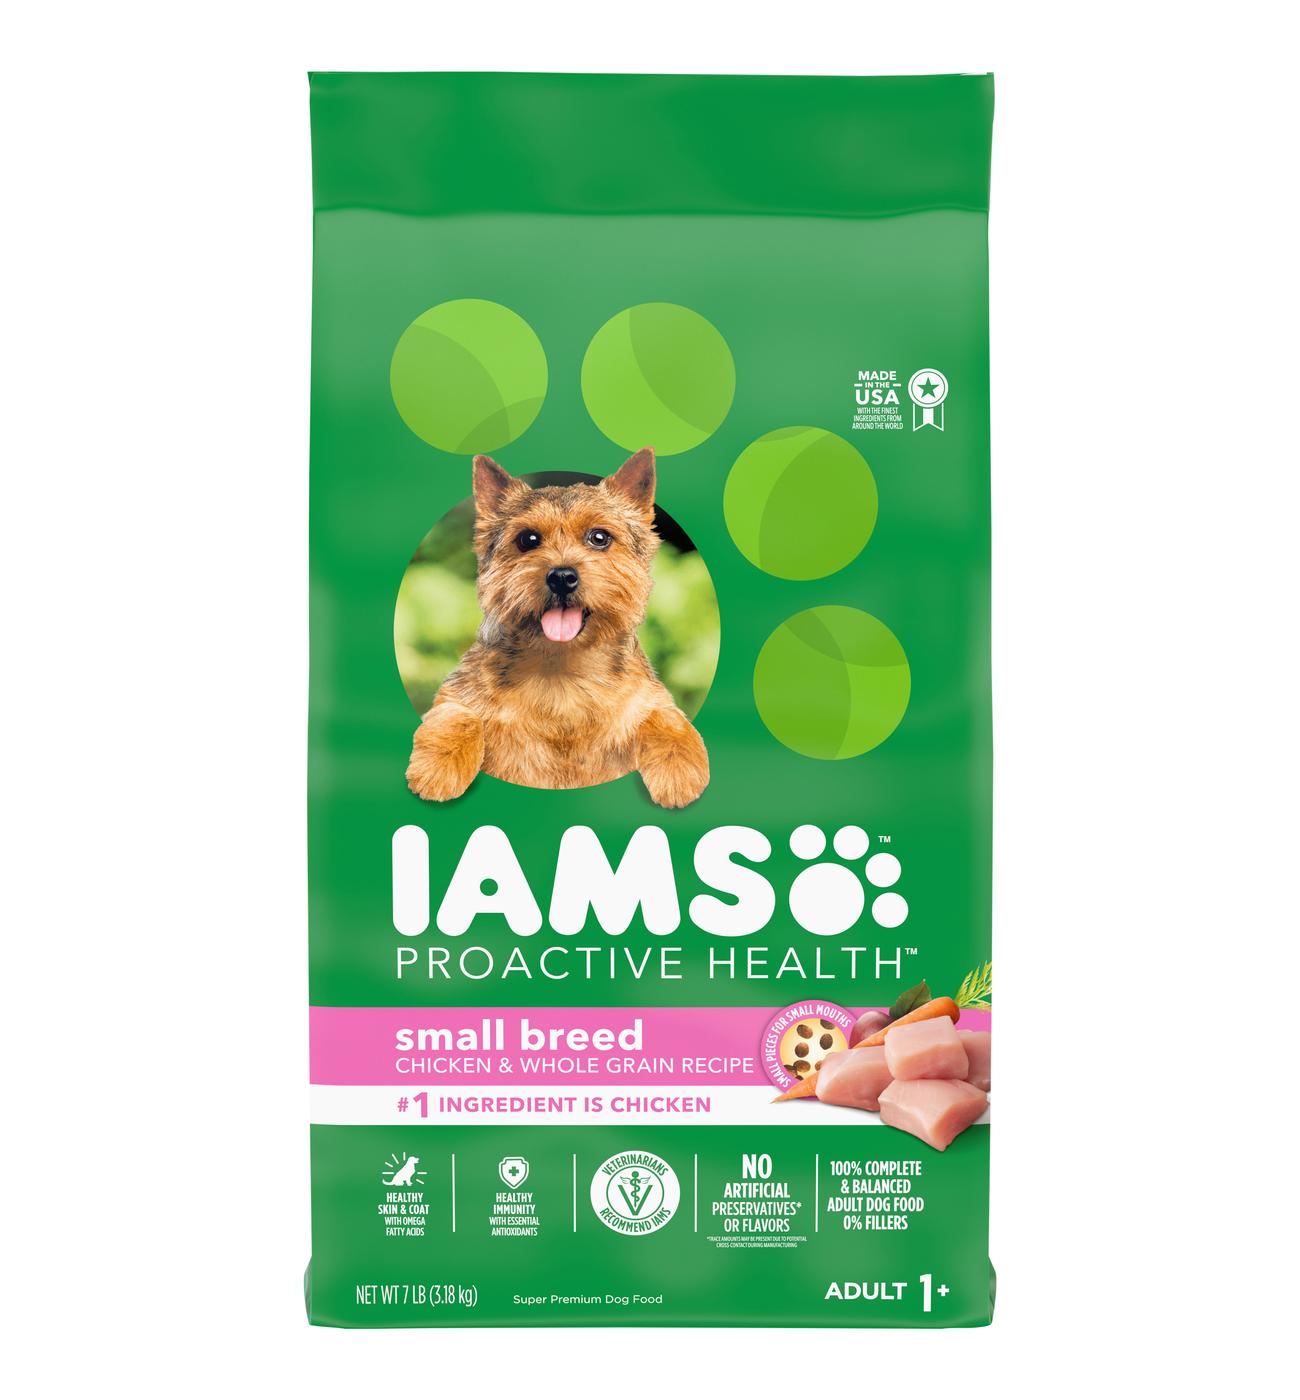 IAMS Proactive Health Small Breed Chicken Recipe Adult Dry Dog Food; image 1 of 2